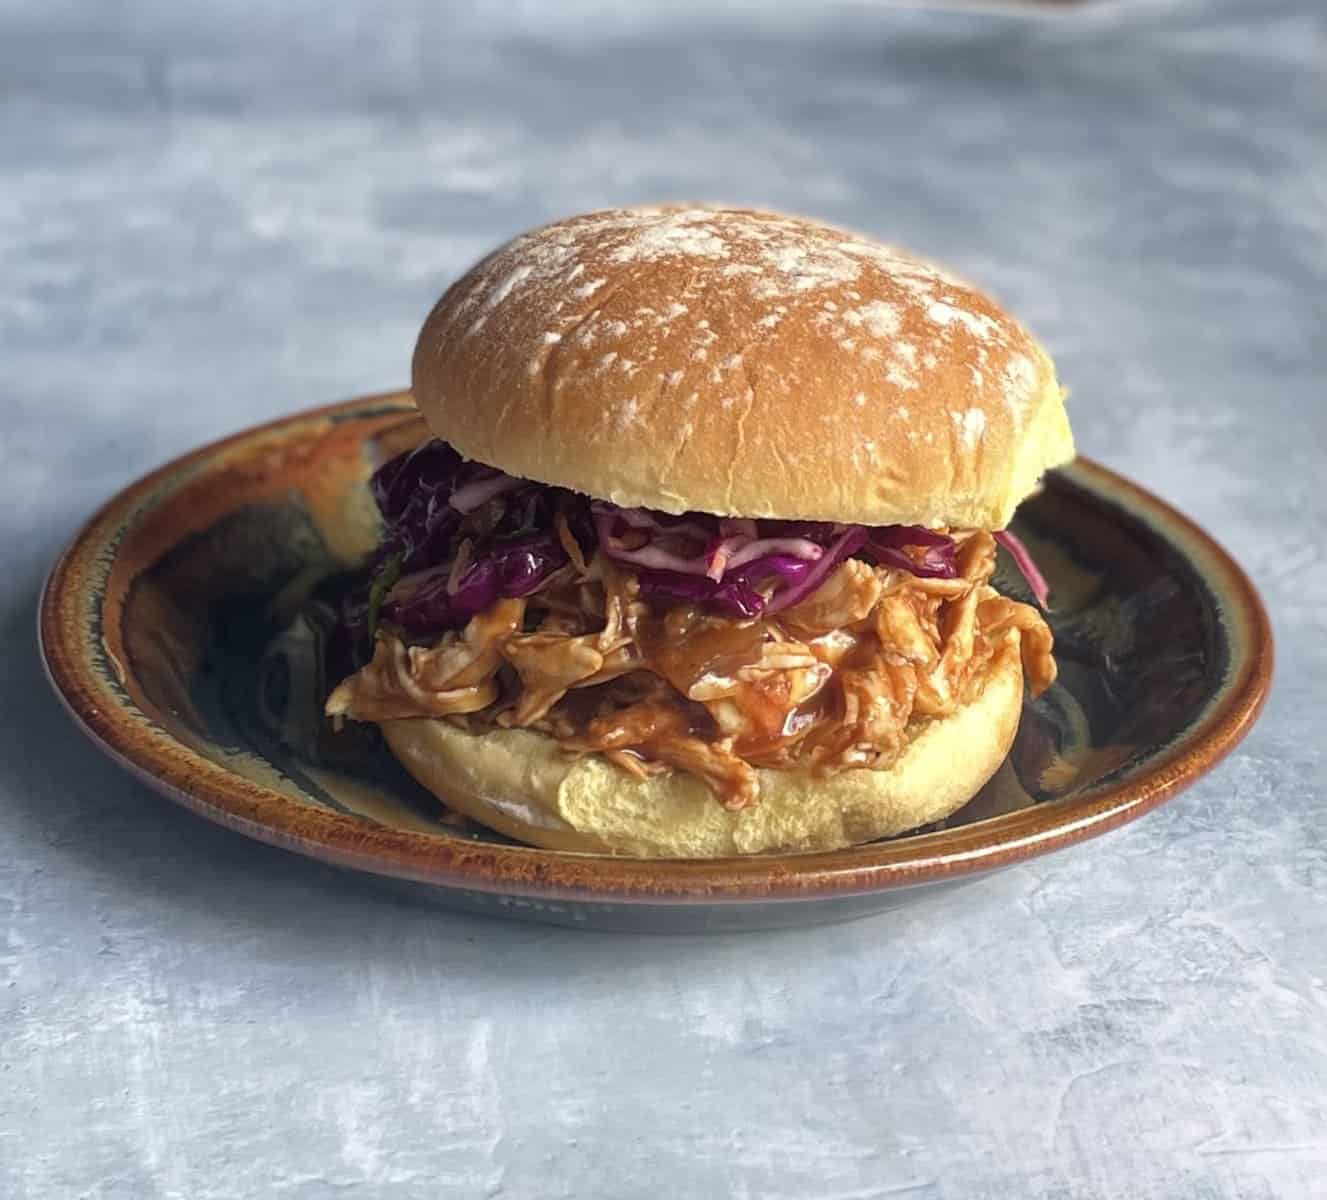 BBQ pulled chicken sandwich with shredded chicken and coleslaw on a bun on a plate.